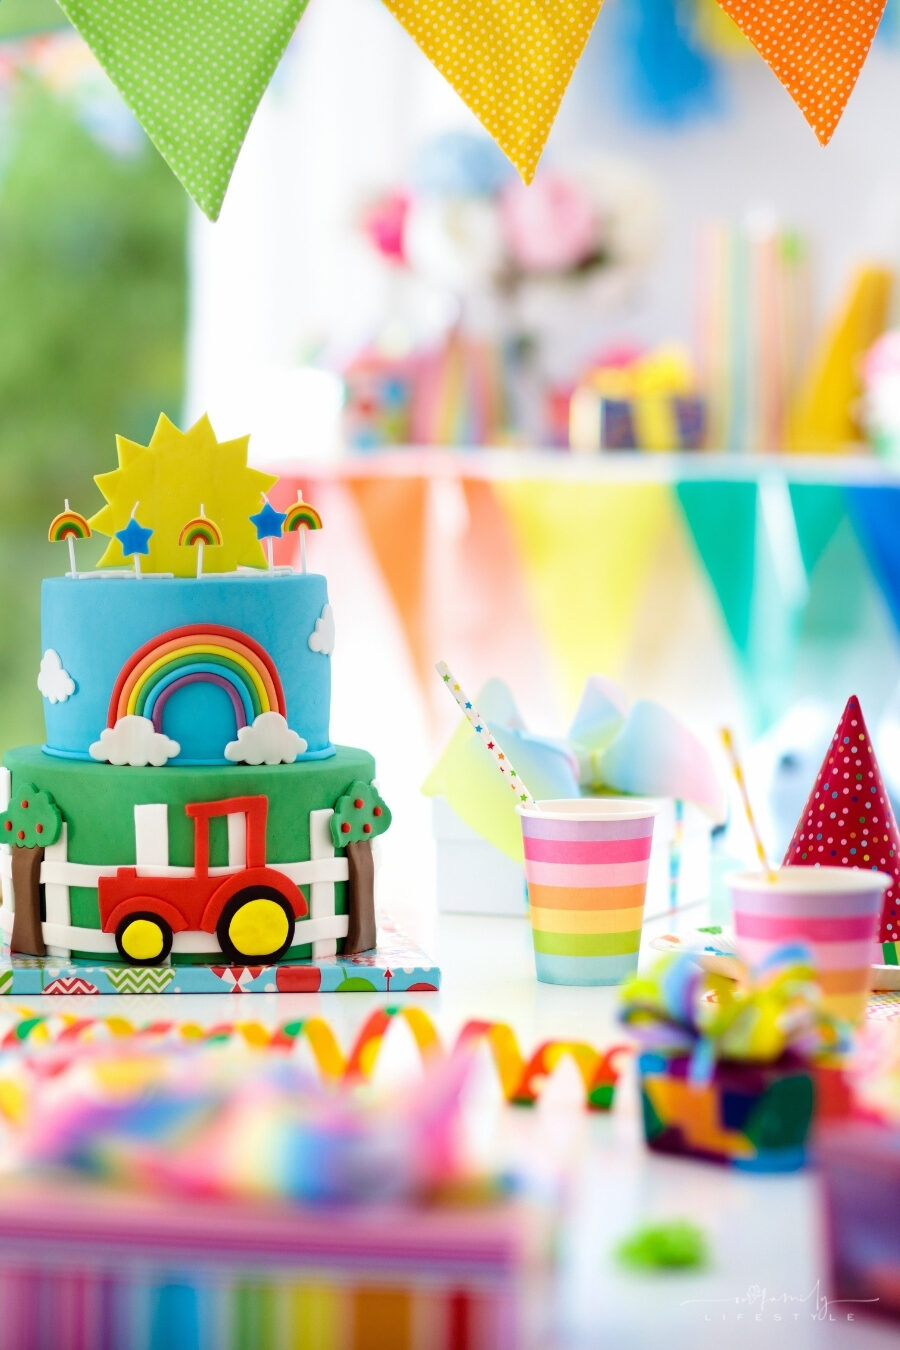 6 Tips for Throwing an Unforgettable Birthday Party